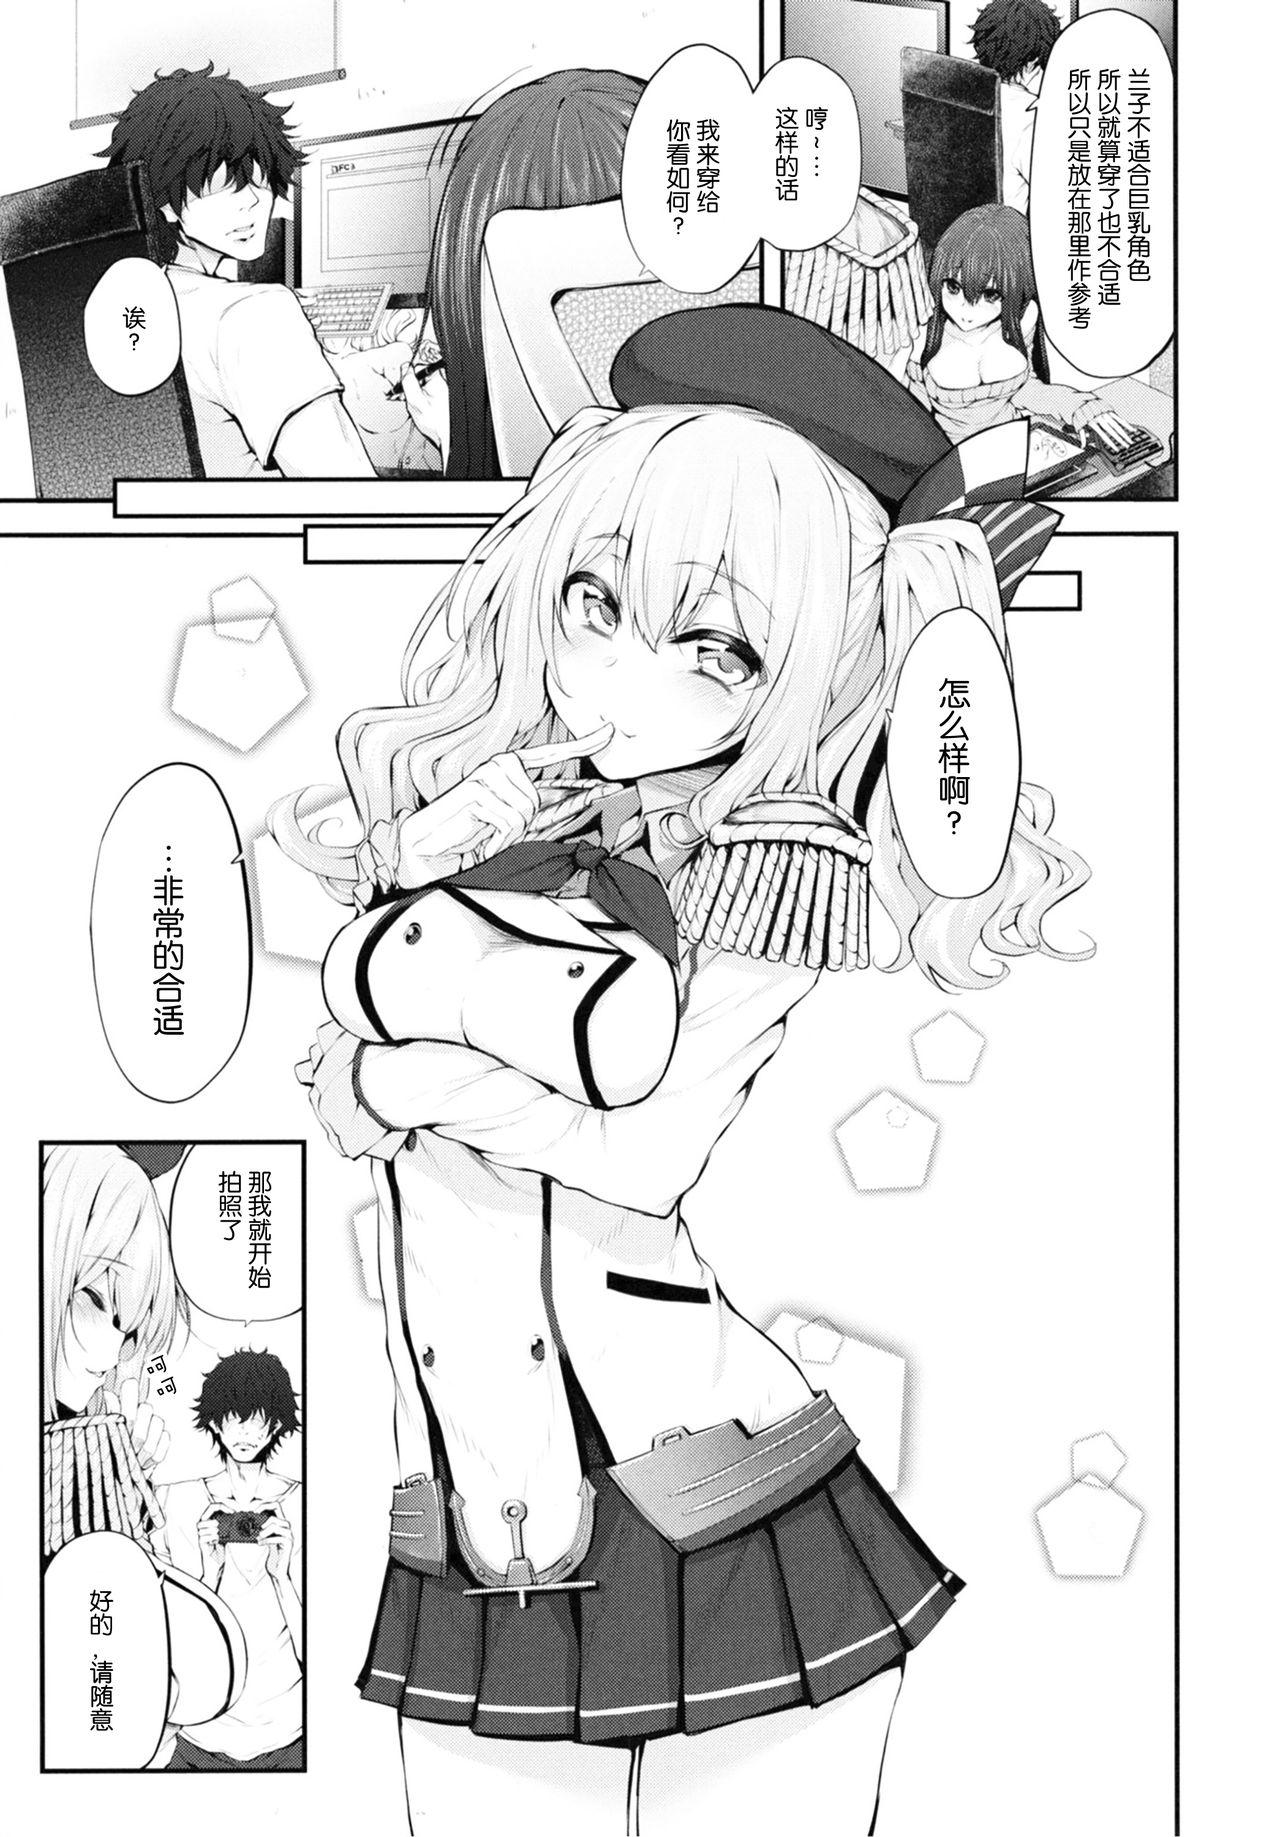 Double COSBITCH! Marked-girls Origin Vol. 1 - Kantai collection Tight Pussy Porn - Page 9